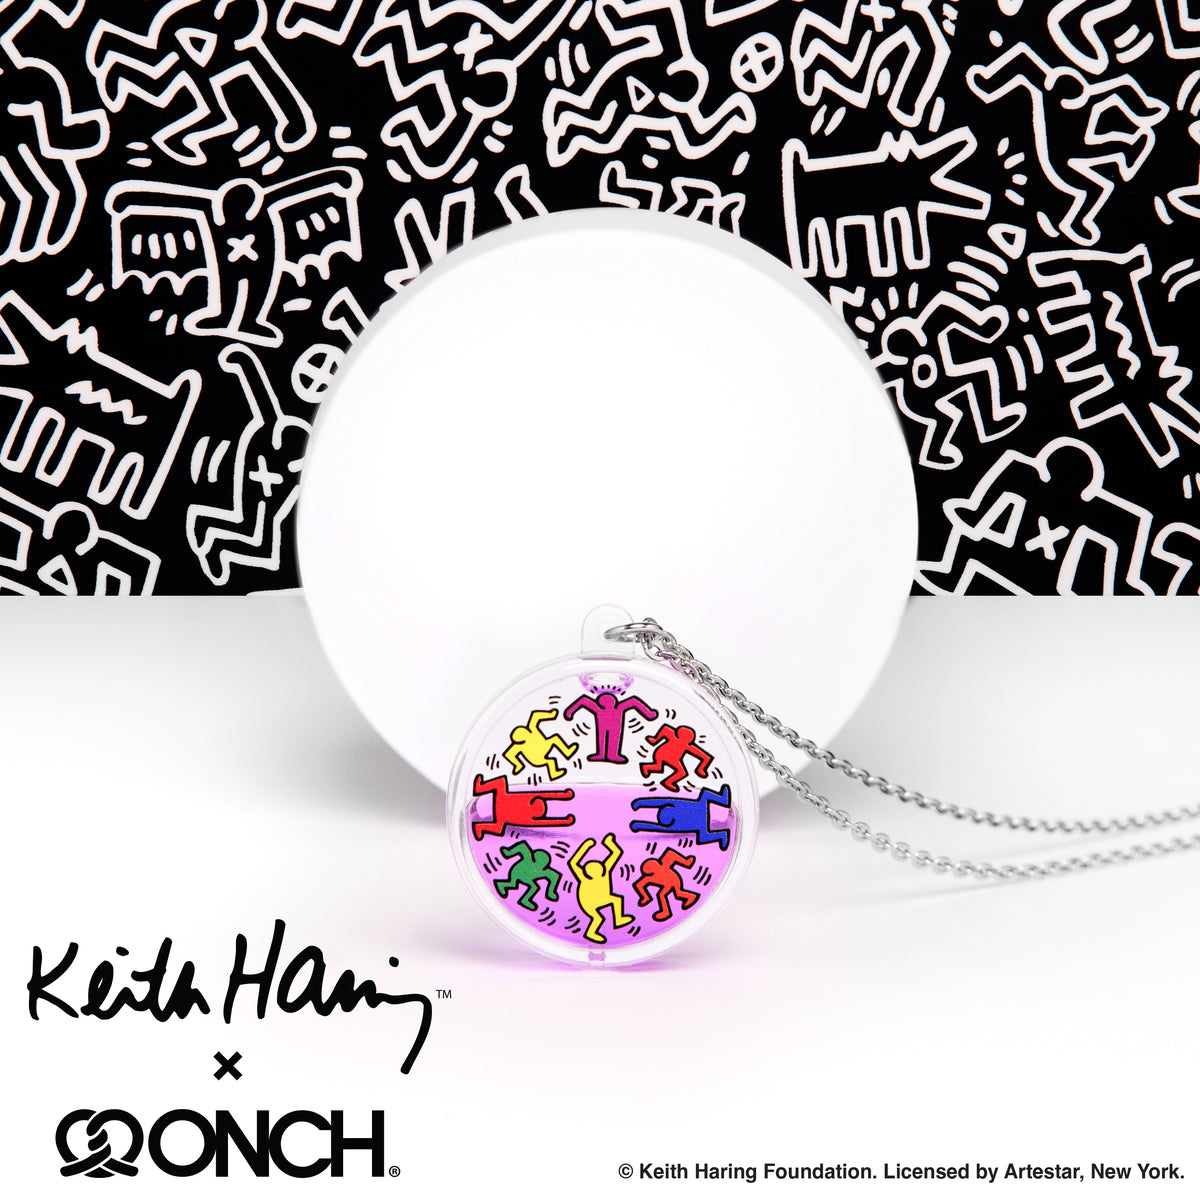 Keith Haring art with eight dancing rainbow men printed on round clear acrylic pendant filled with purple liquid. Black and white Keith Haring all over print background with collaboration logo with designer ONCH